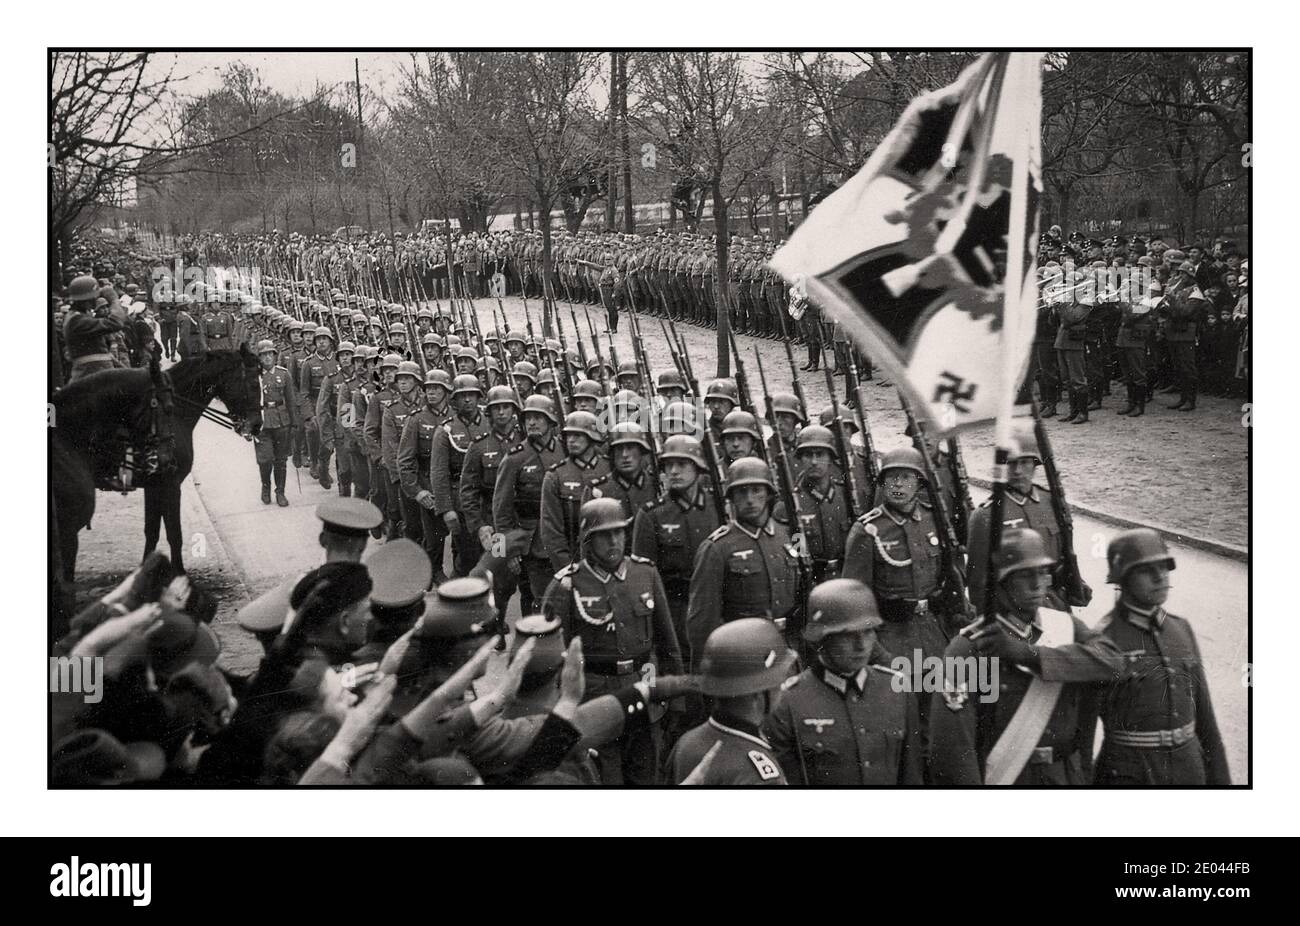 1940 Nazi Wehrmacht Army Marching Parade, with regimental standard flag at front. Military band playing behind. Spectators giving Heil Hitler salute in foreground. Stock Photo